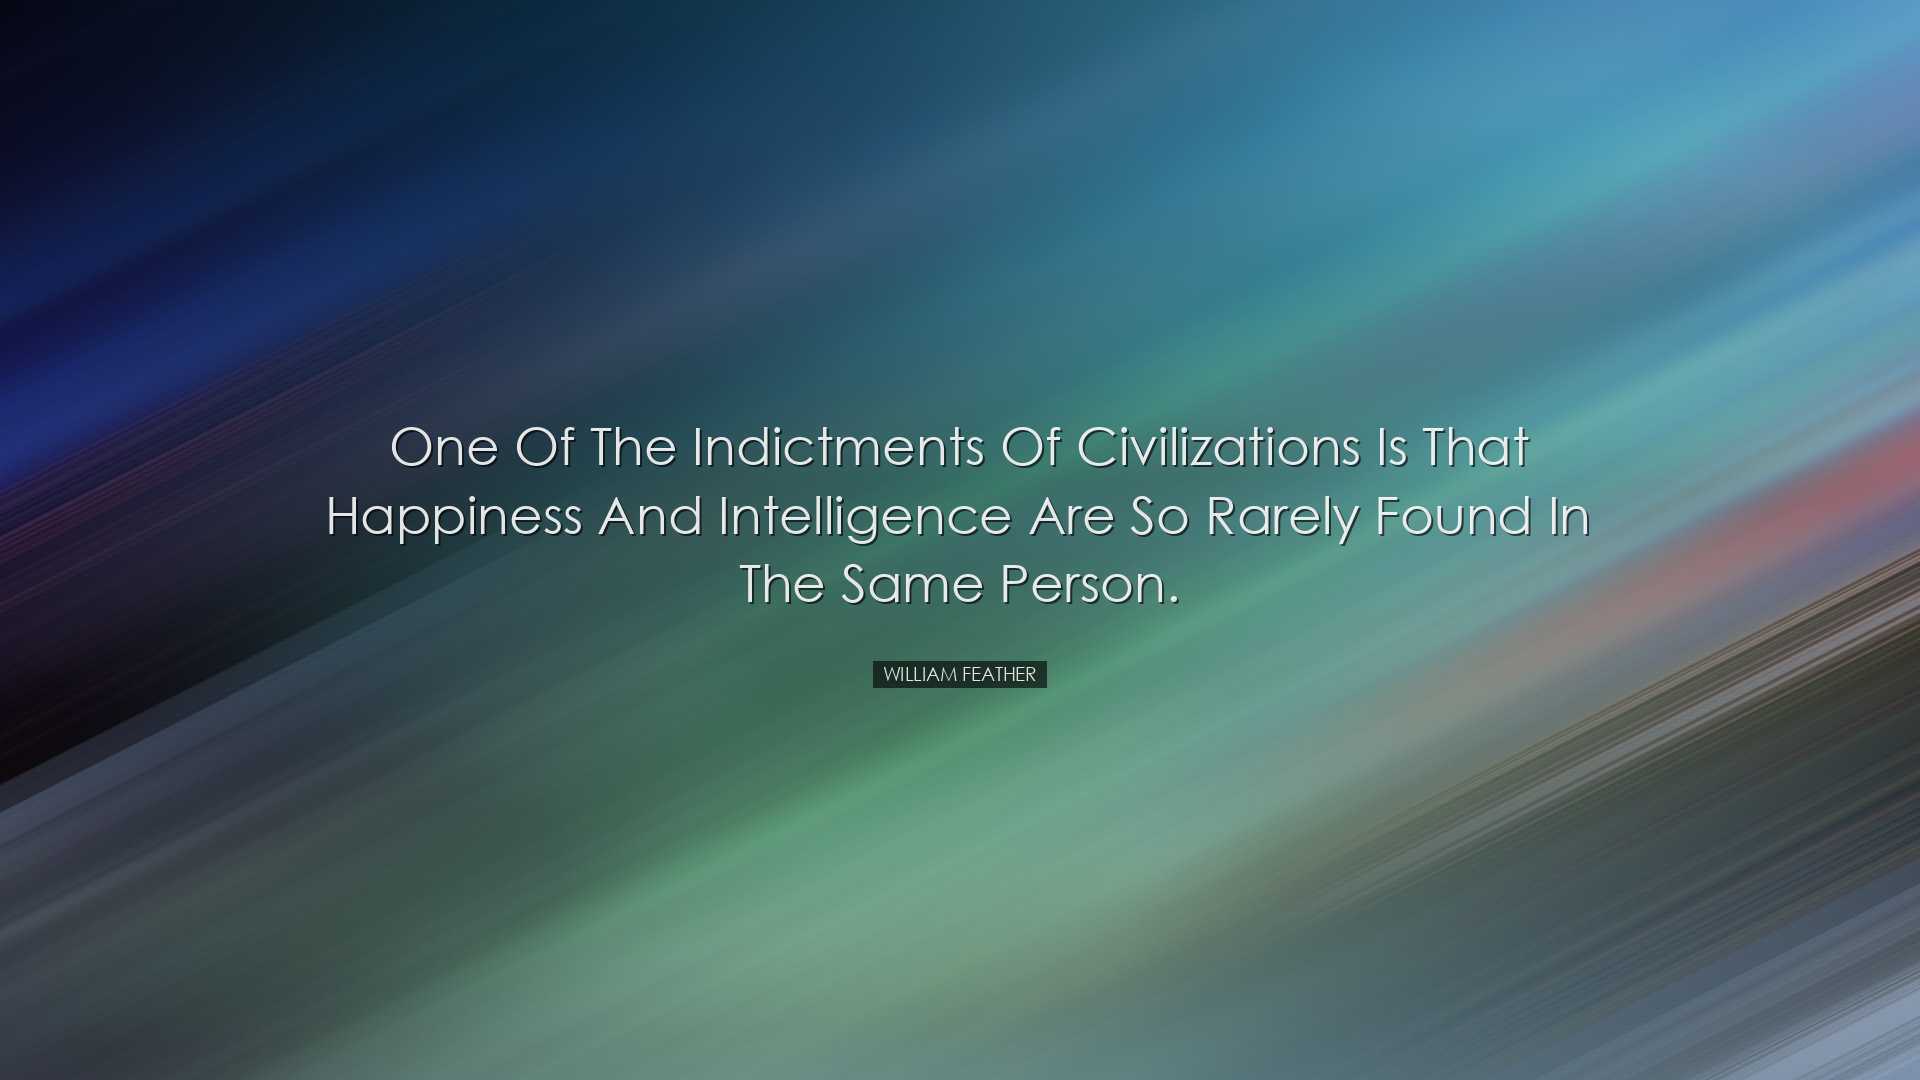 One of the indictments of civilizations is that happiness and inte